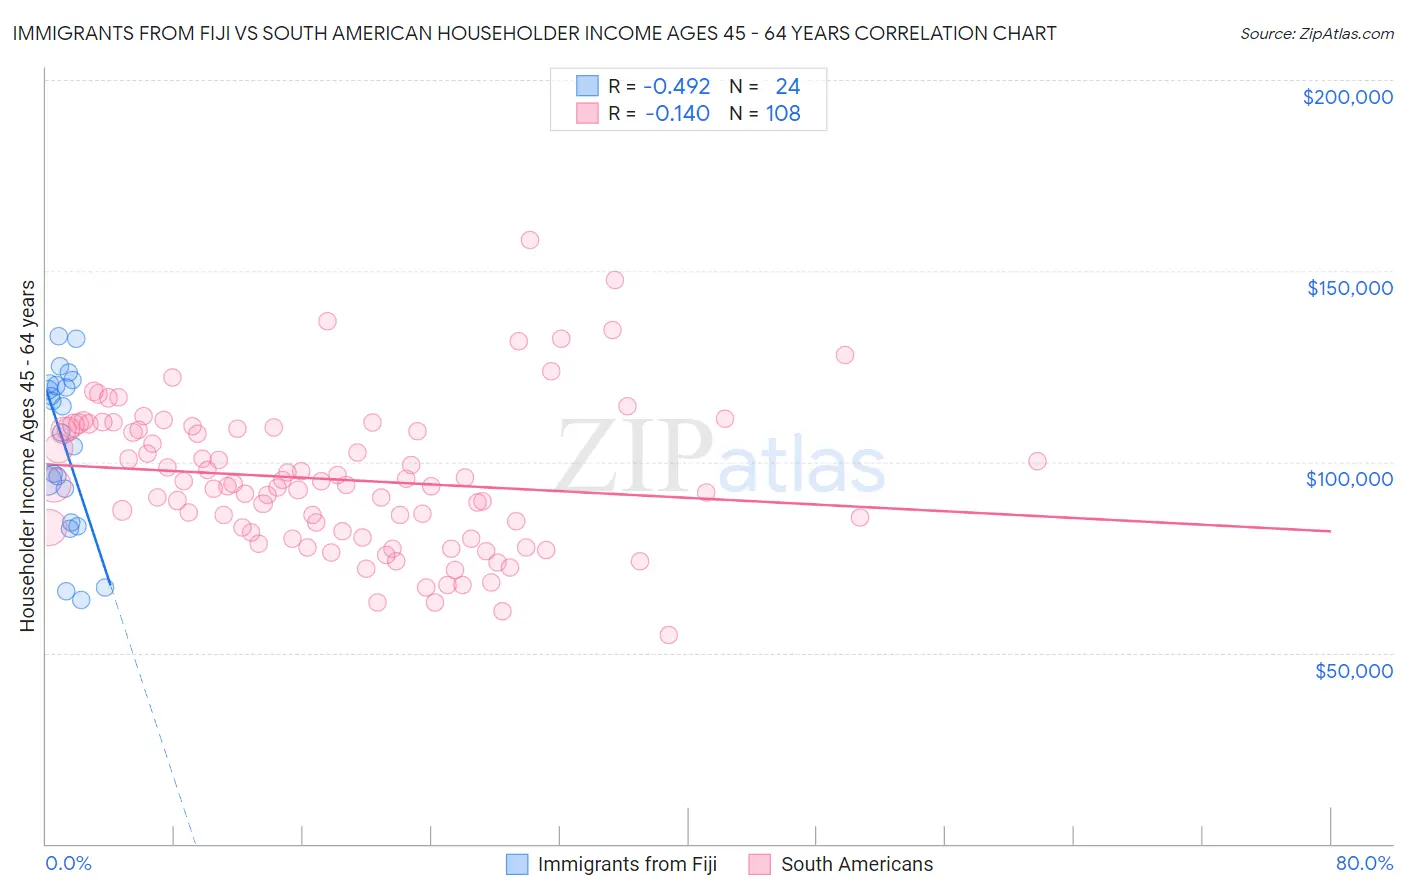 Immigrants from Fiji vs South American Householder Income Ages 45 - 64 years